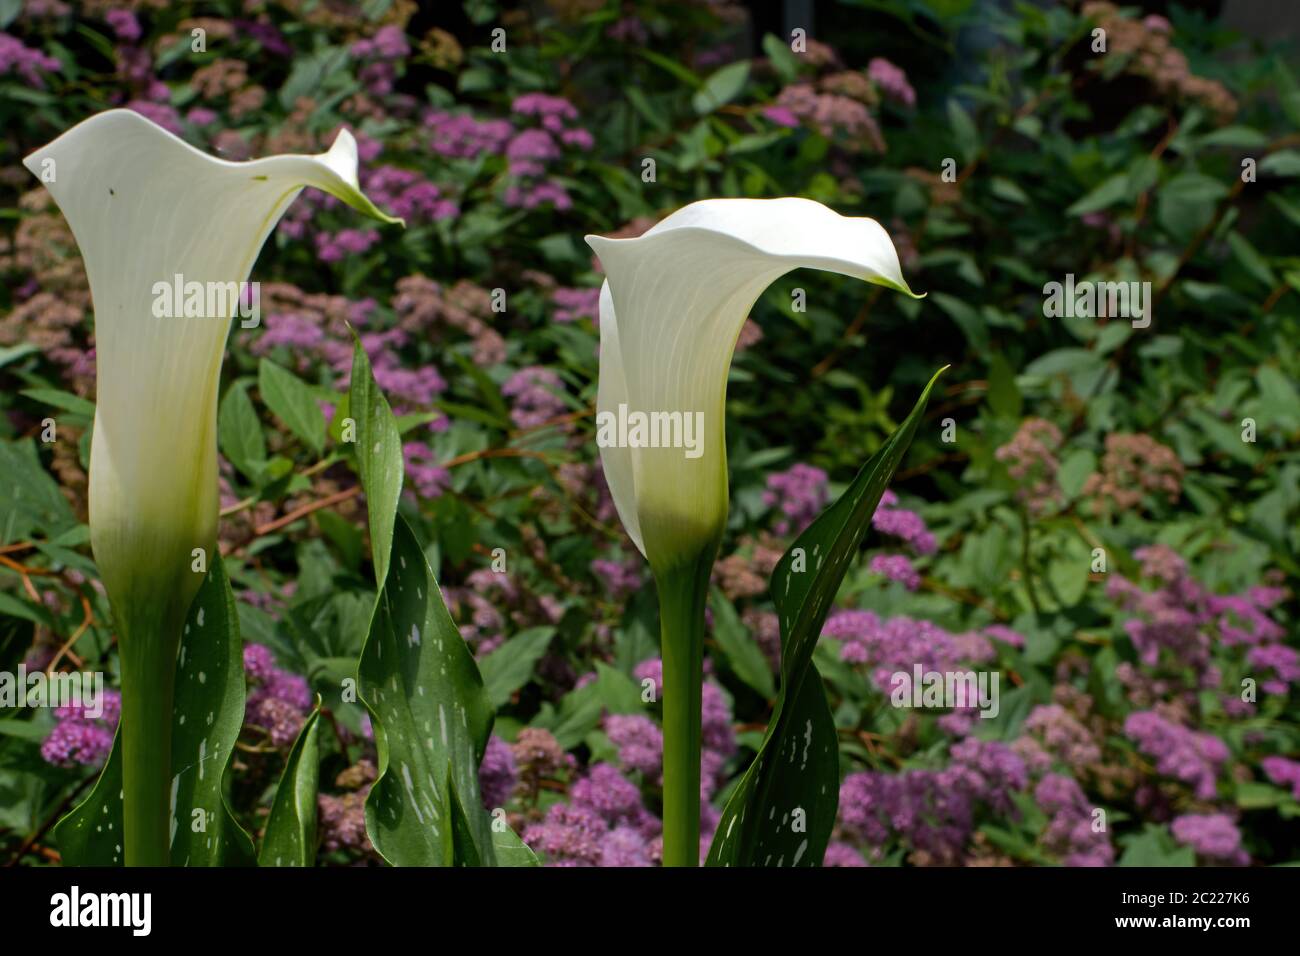 Calla lily also known as arum lily in the garden. The species is native to southern Africa in Lesotho, South Africa, and Swaziland. Stock Photo